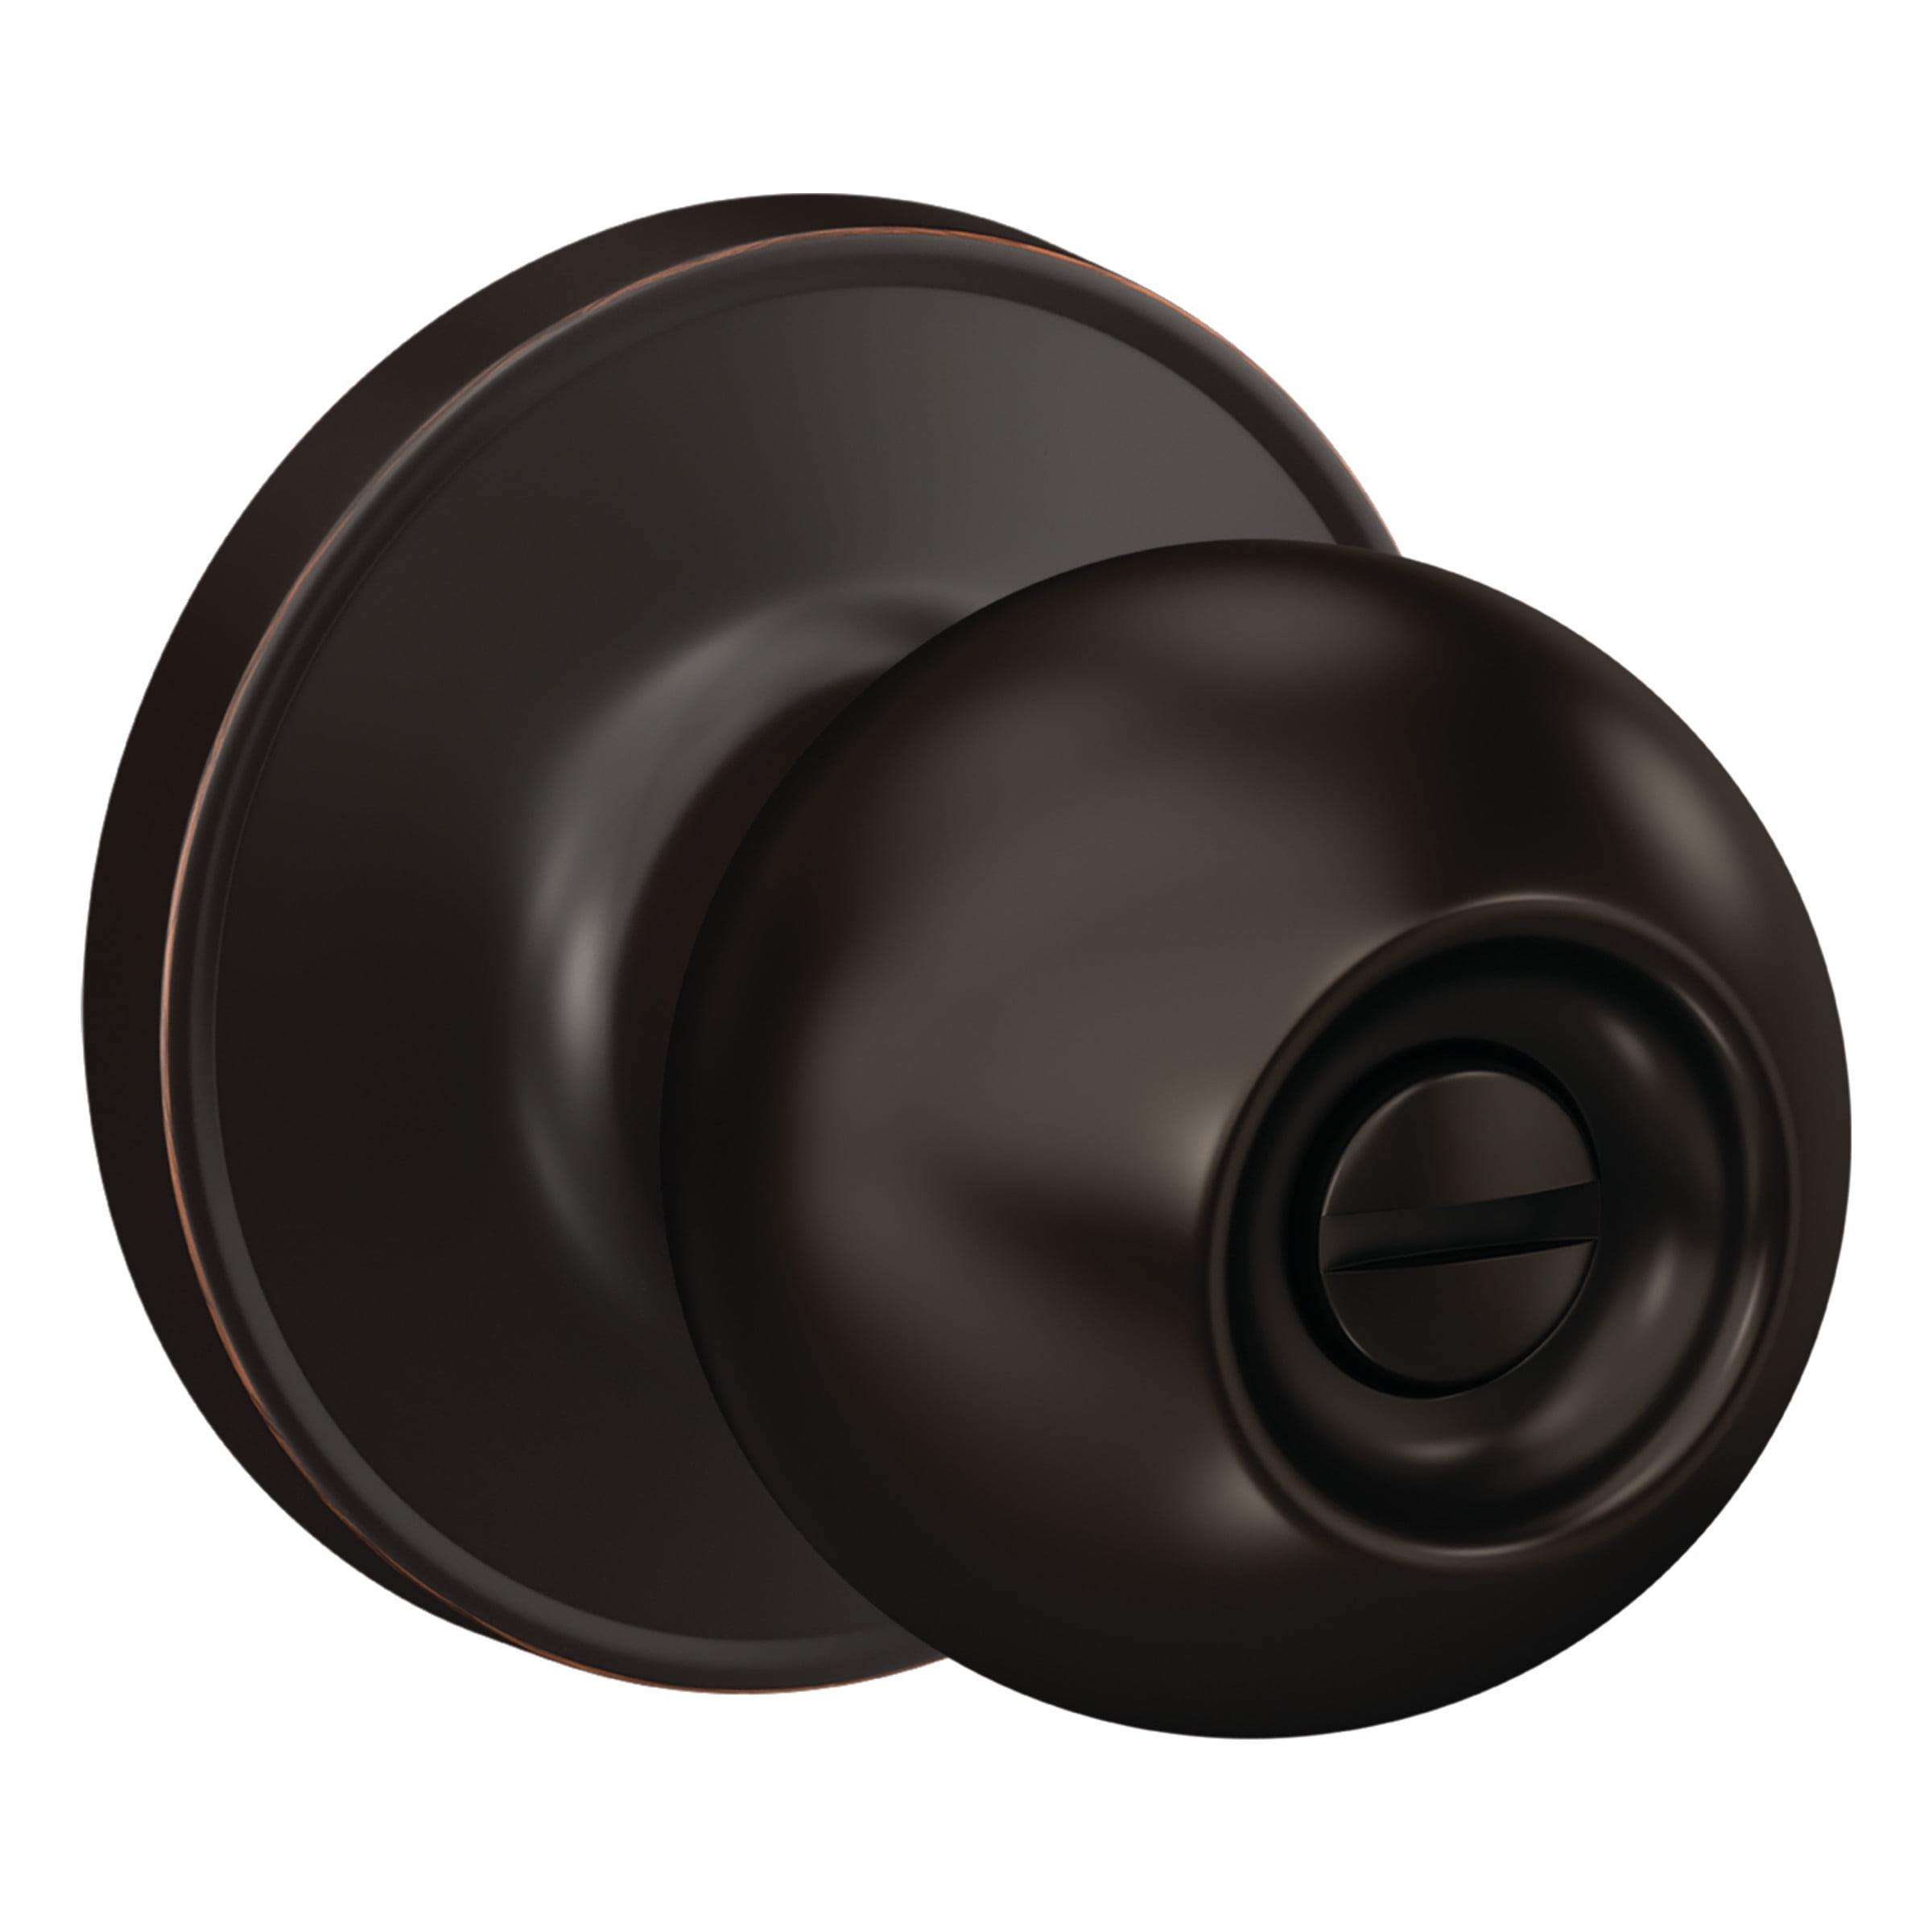 First Secure by Schlage Rigsby Bedroom and Bathroom Privacy Lock Door Knob in Aged Bronze for Interior Door